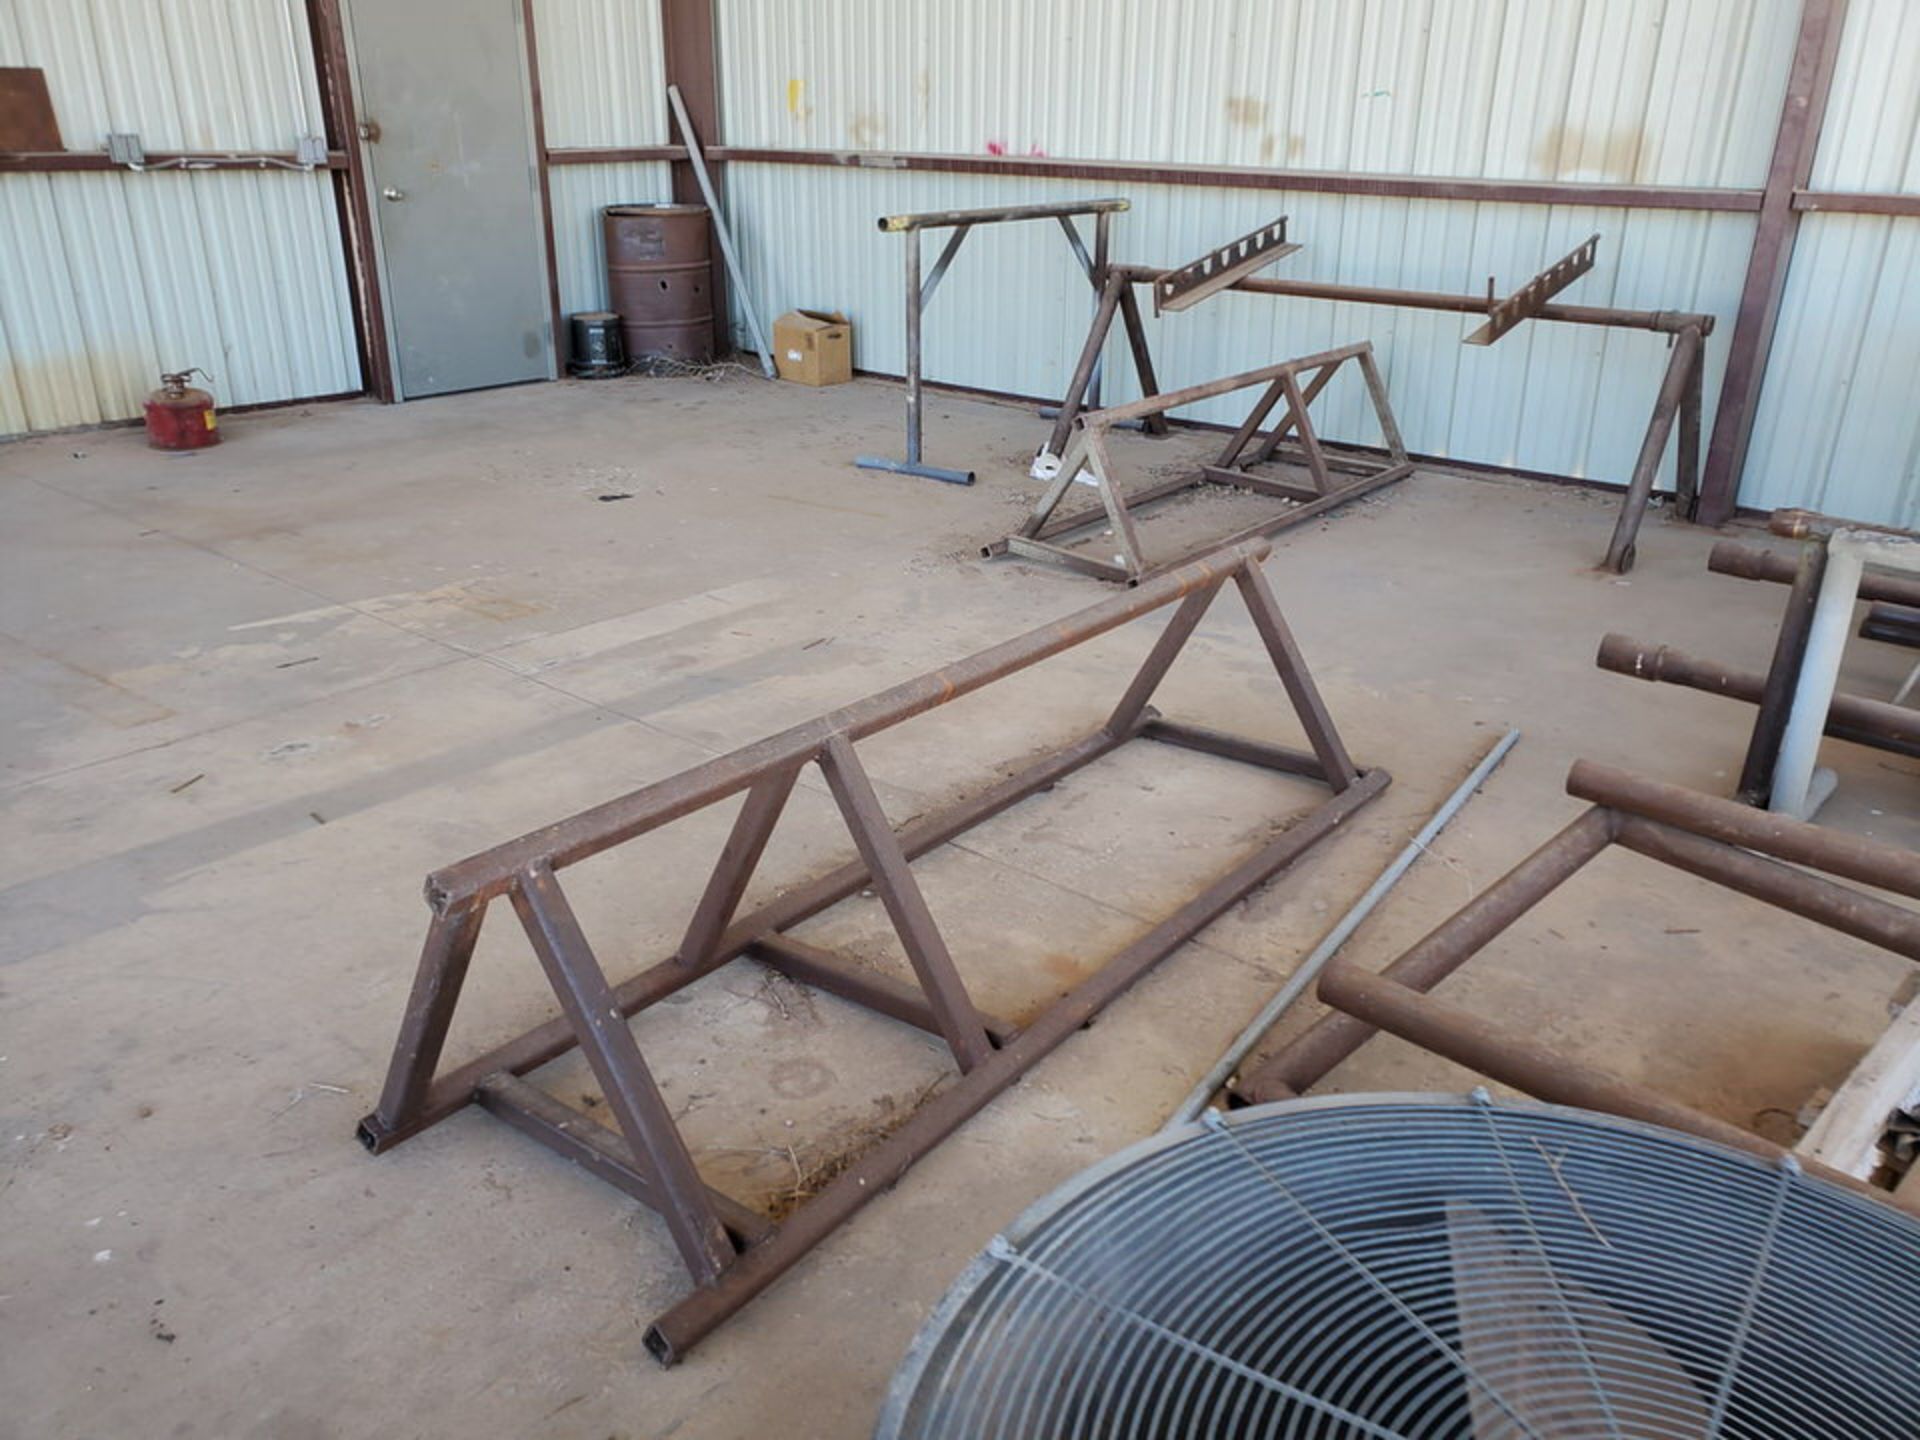 Misc. Matl. To Include But Not Limited To: 42" Drum Fan, Saw Horses, Welding Table, etc. - Image 7 of 10